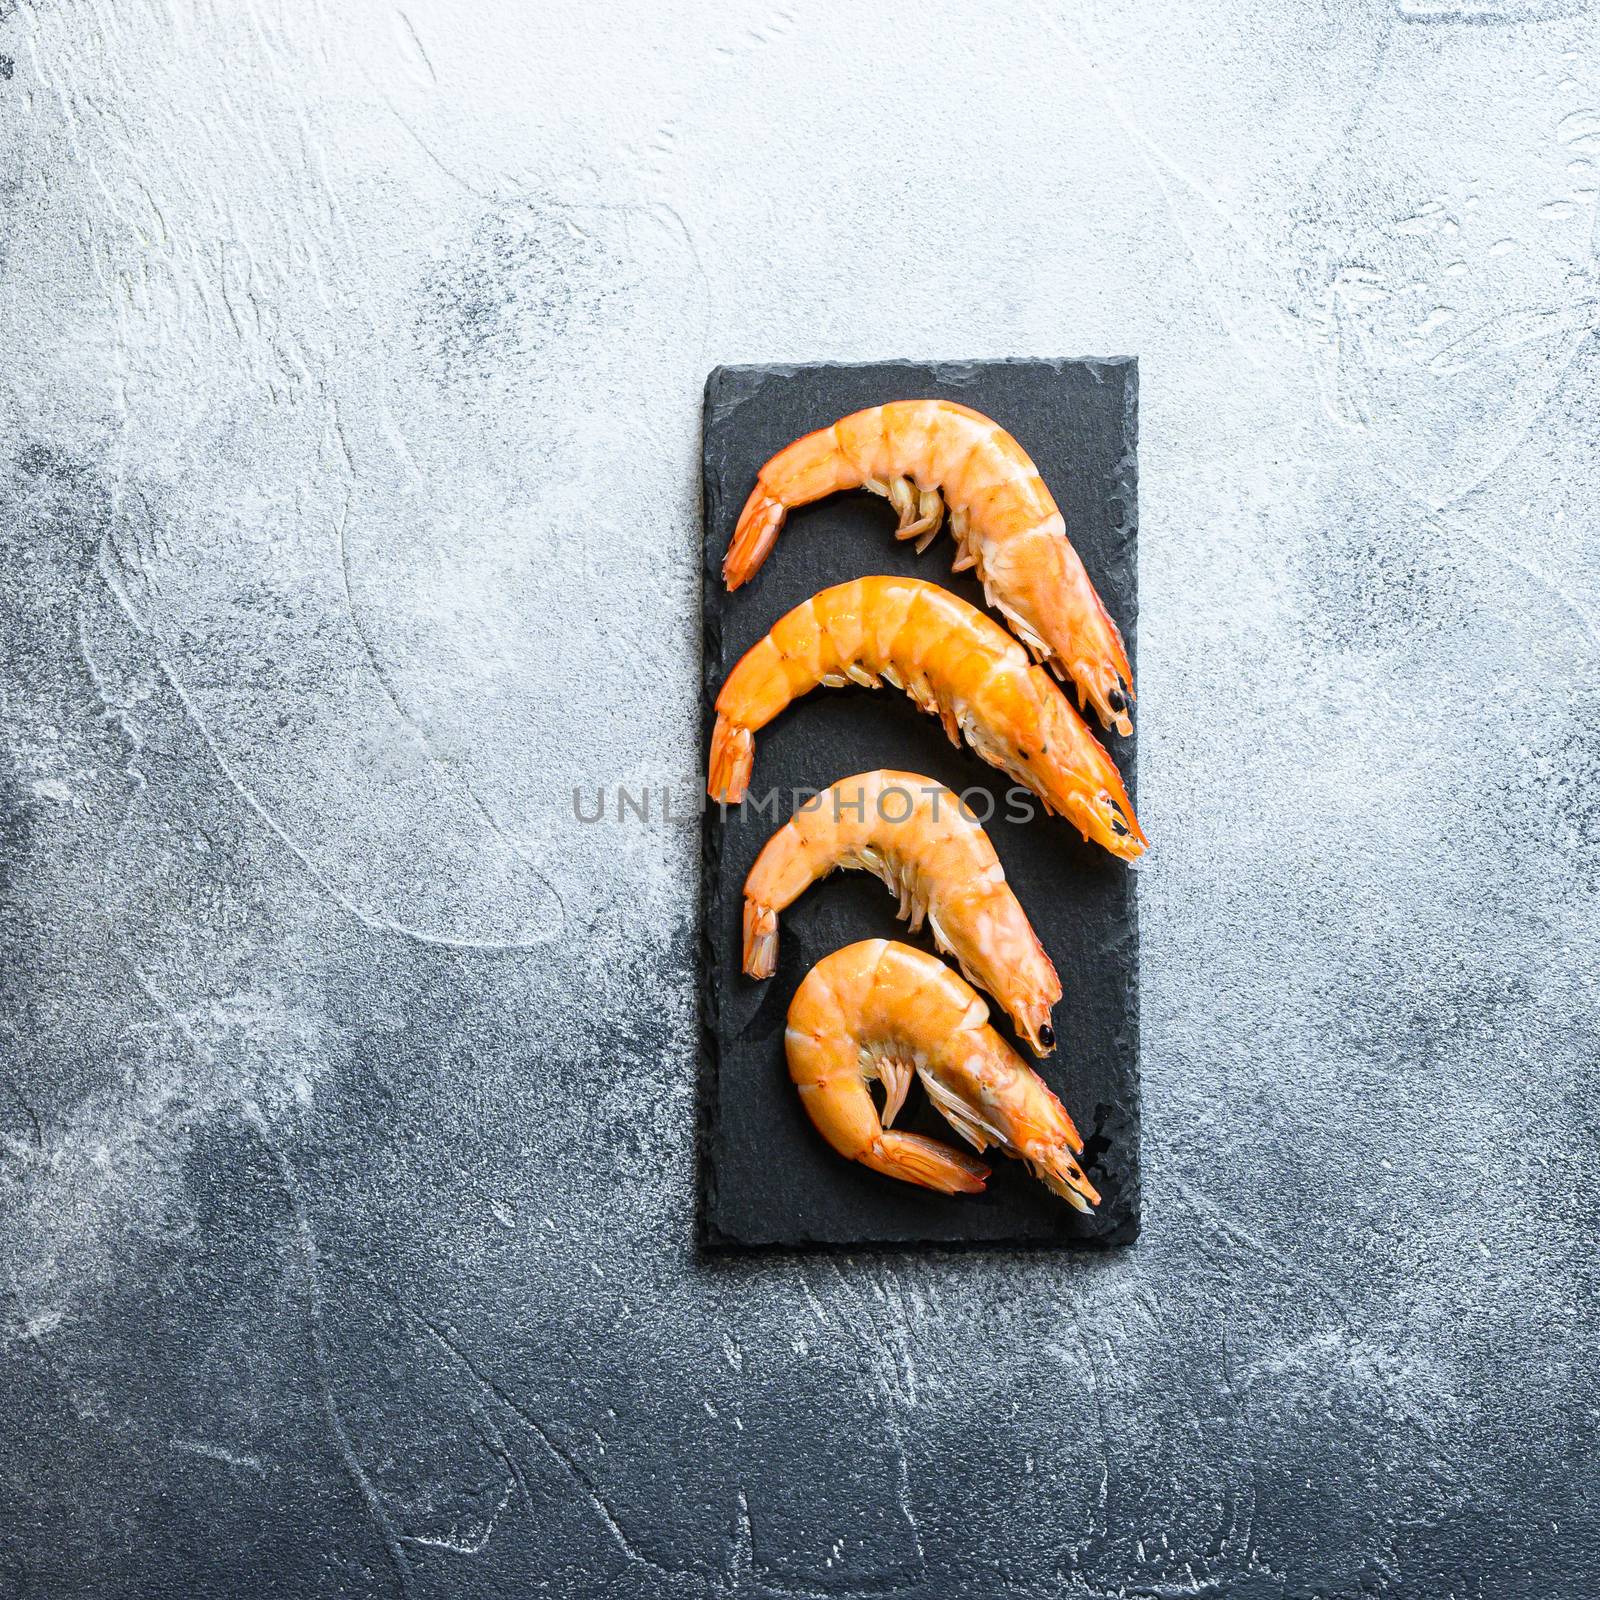 shrimp on a stone cutting board over textured grey white backgrounnd, top view, closeup space for text.